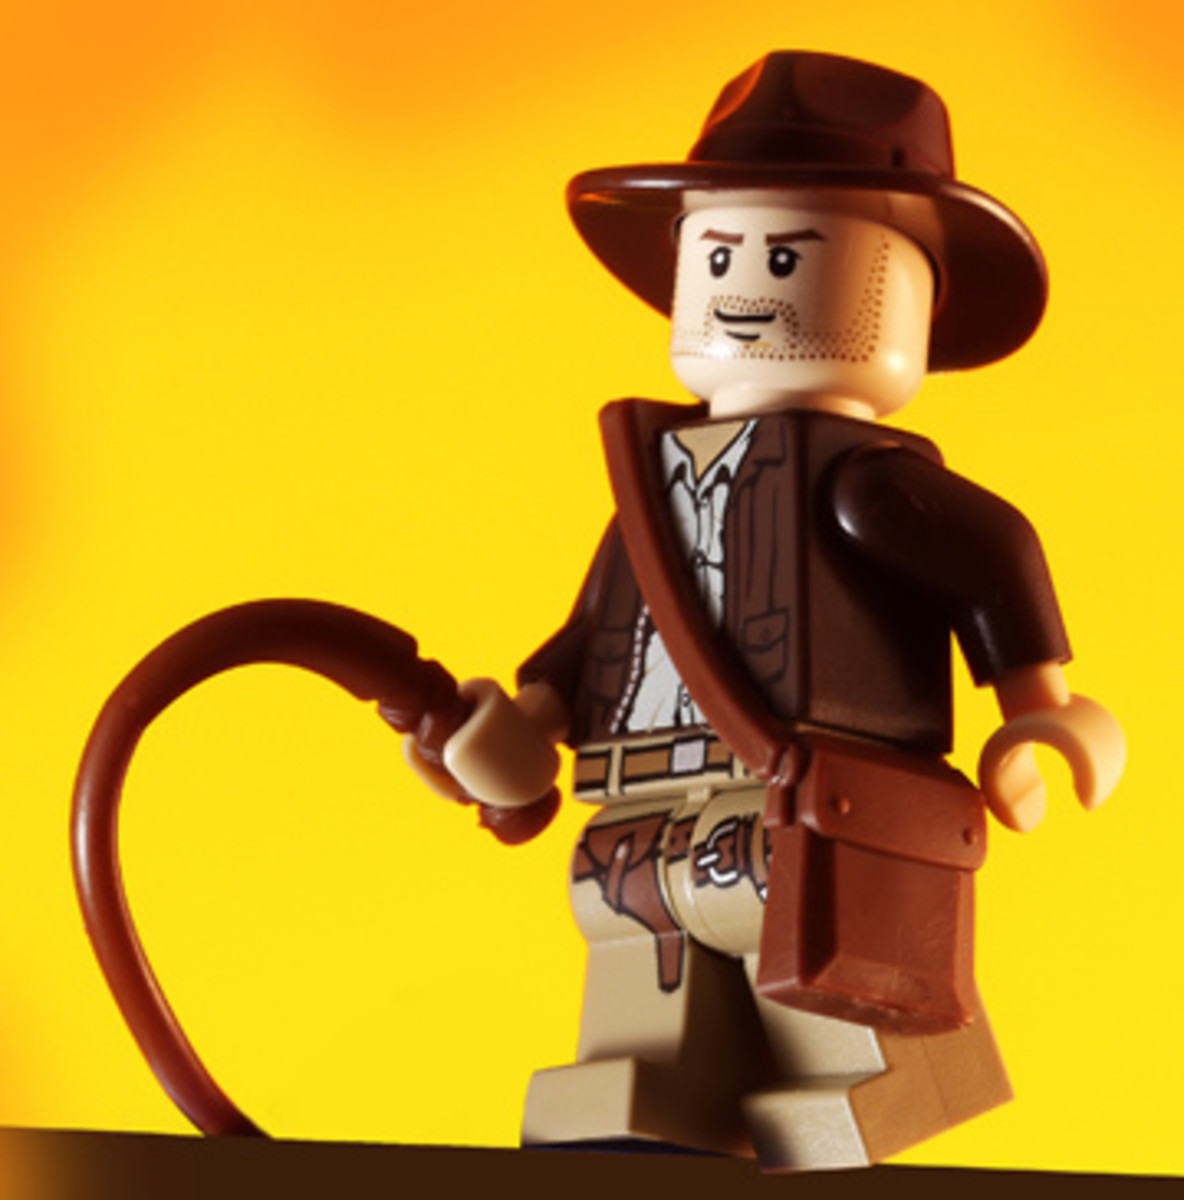 Indiana Jones - Lego Sets and the Video Game